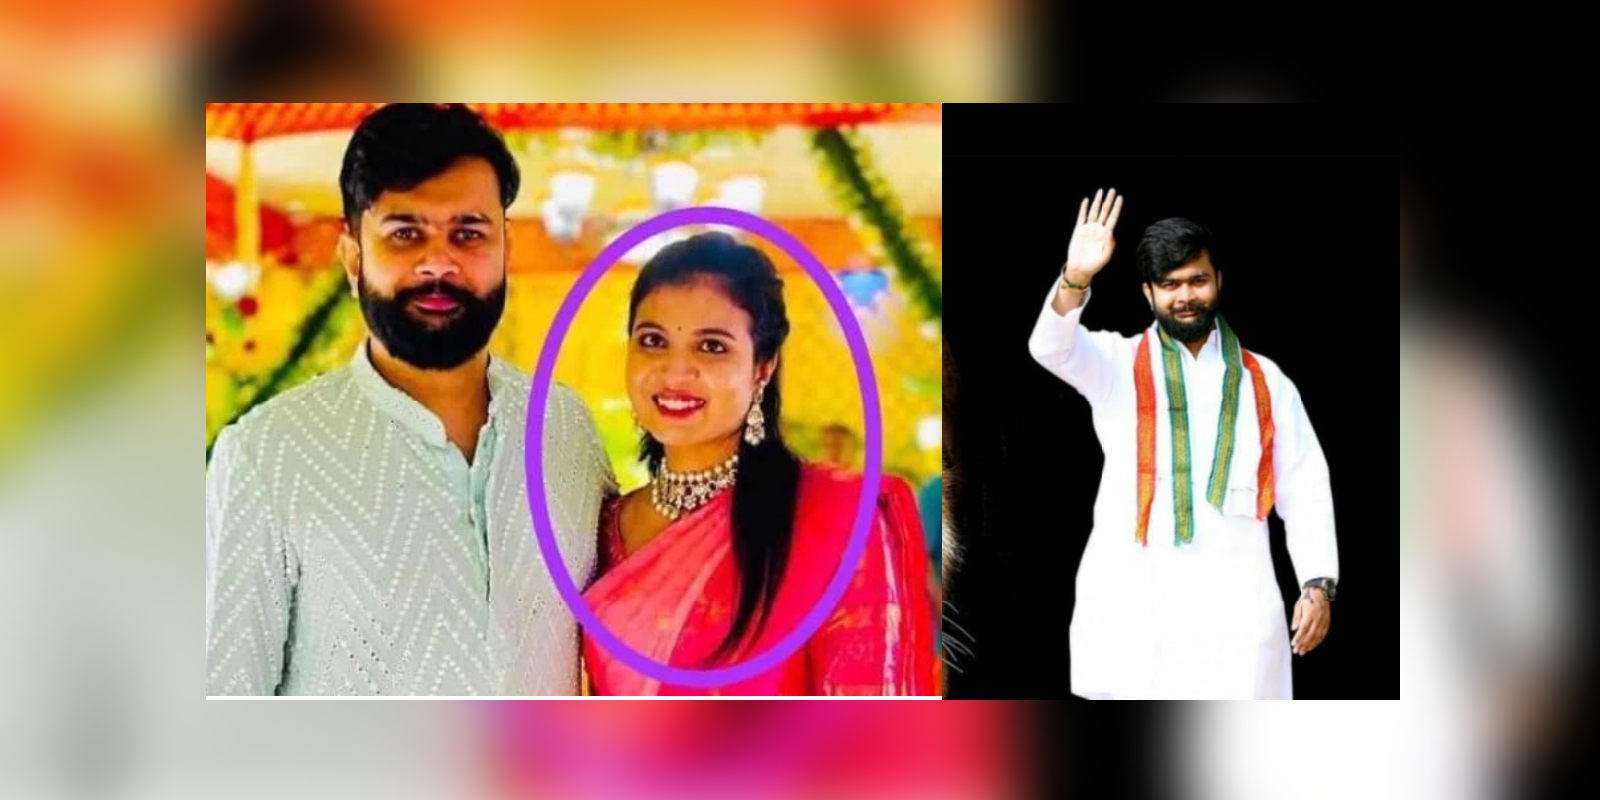 Congress leader accused of wife murder.